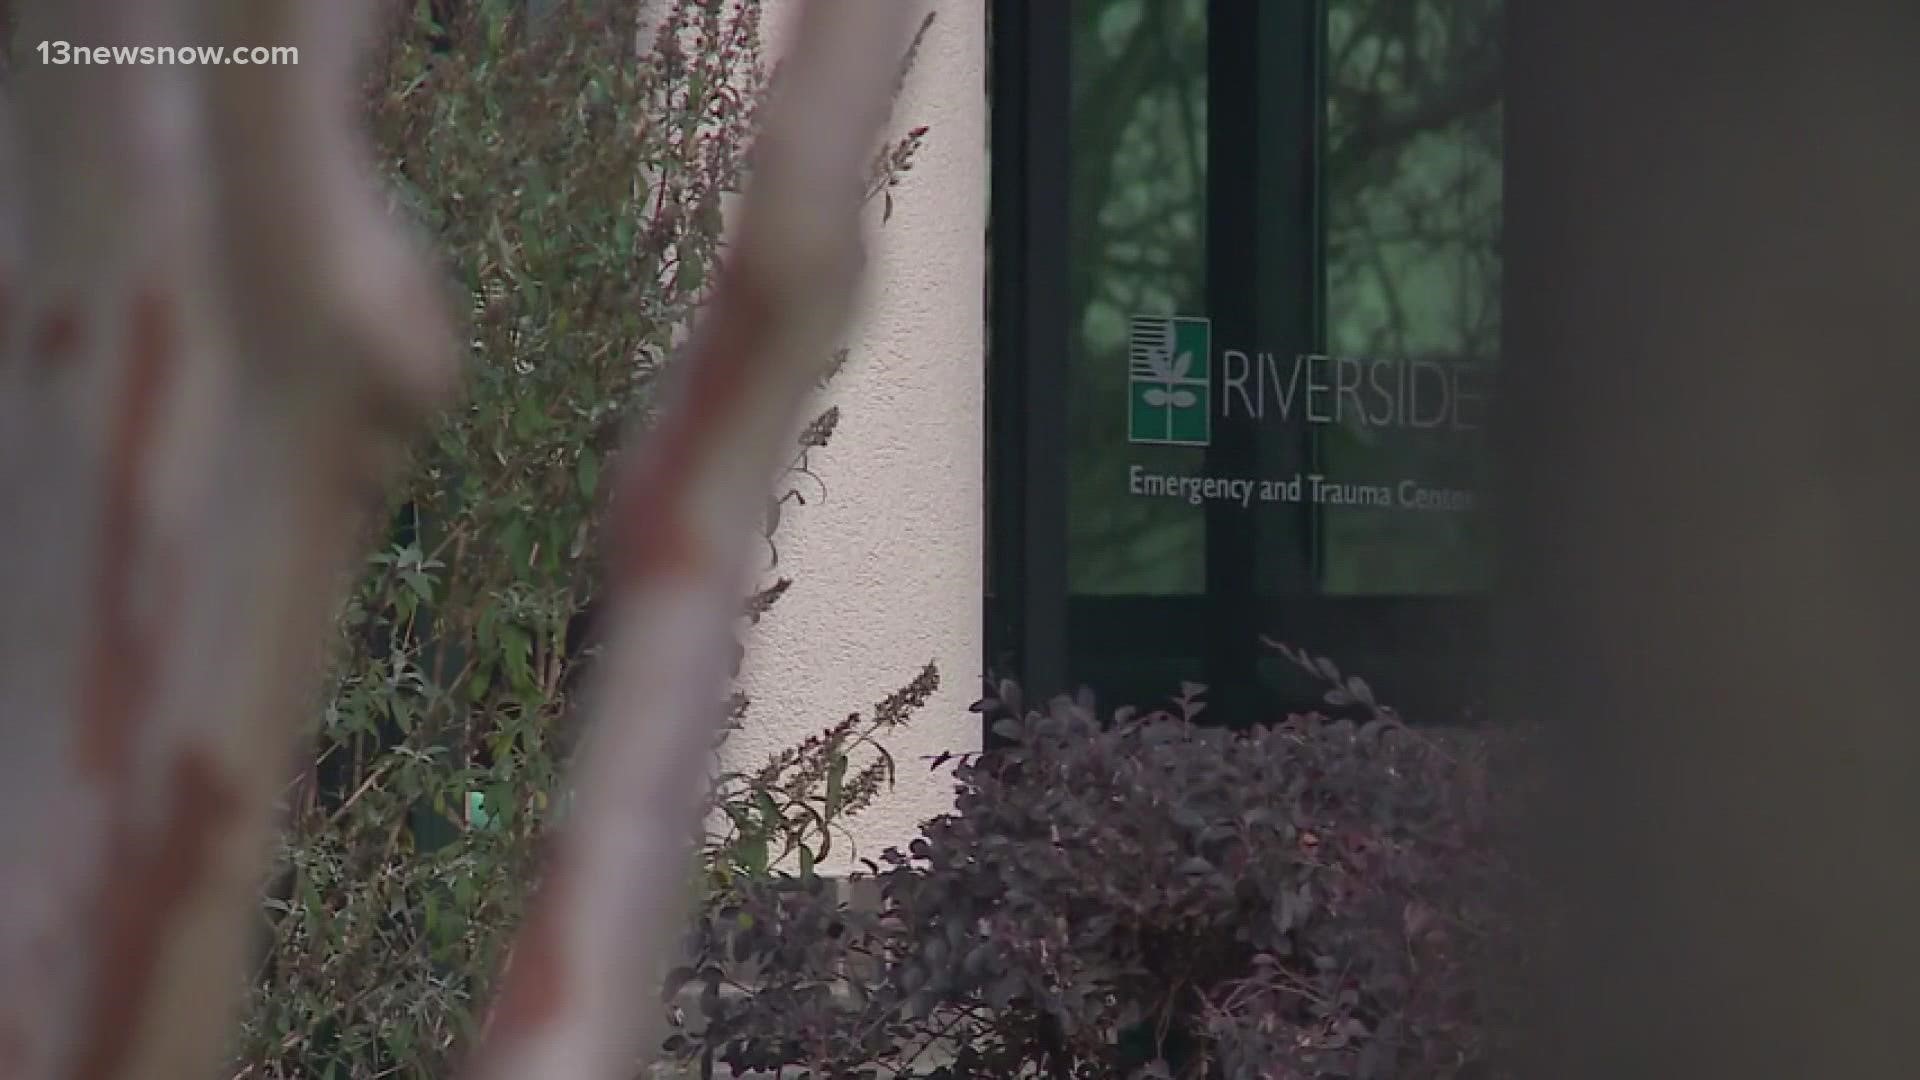 On the same day as Virginia set a new record for COVID-19 hospitalizations, Riverside reported its highest count of patients with the virus.